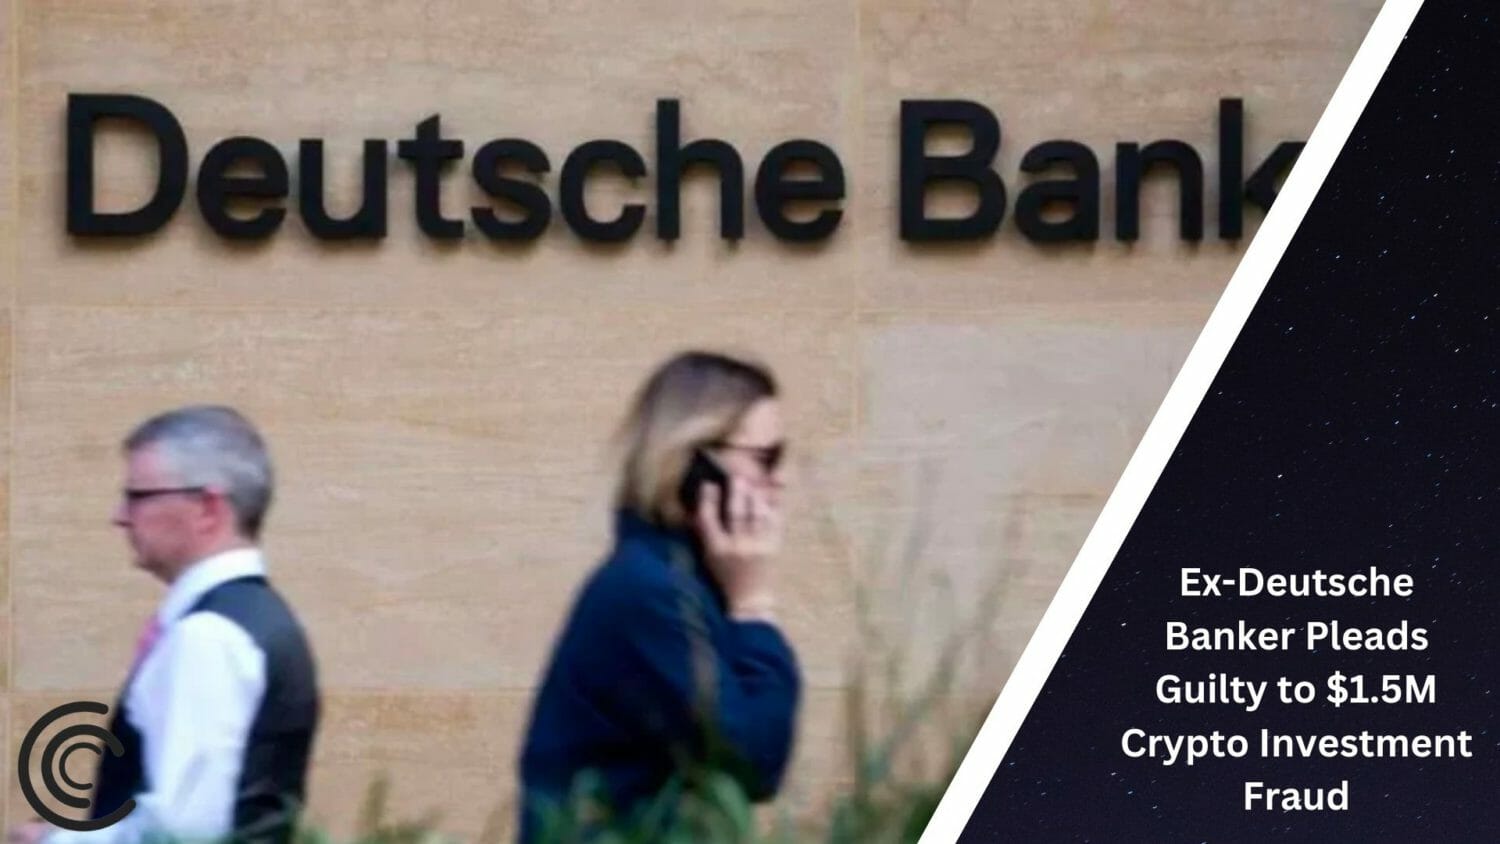 Ex-Deutsche Banker Pleads Guilty To $1.5M Crypto Investment Fraud